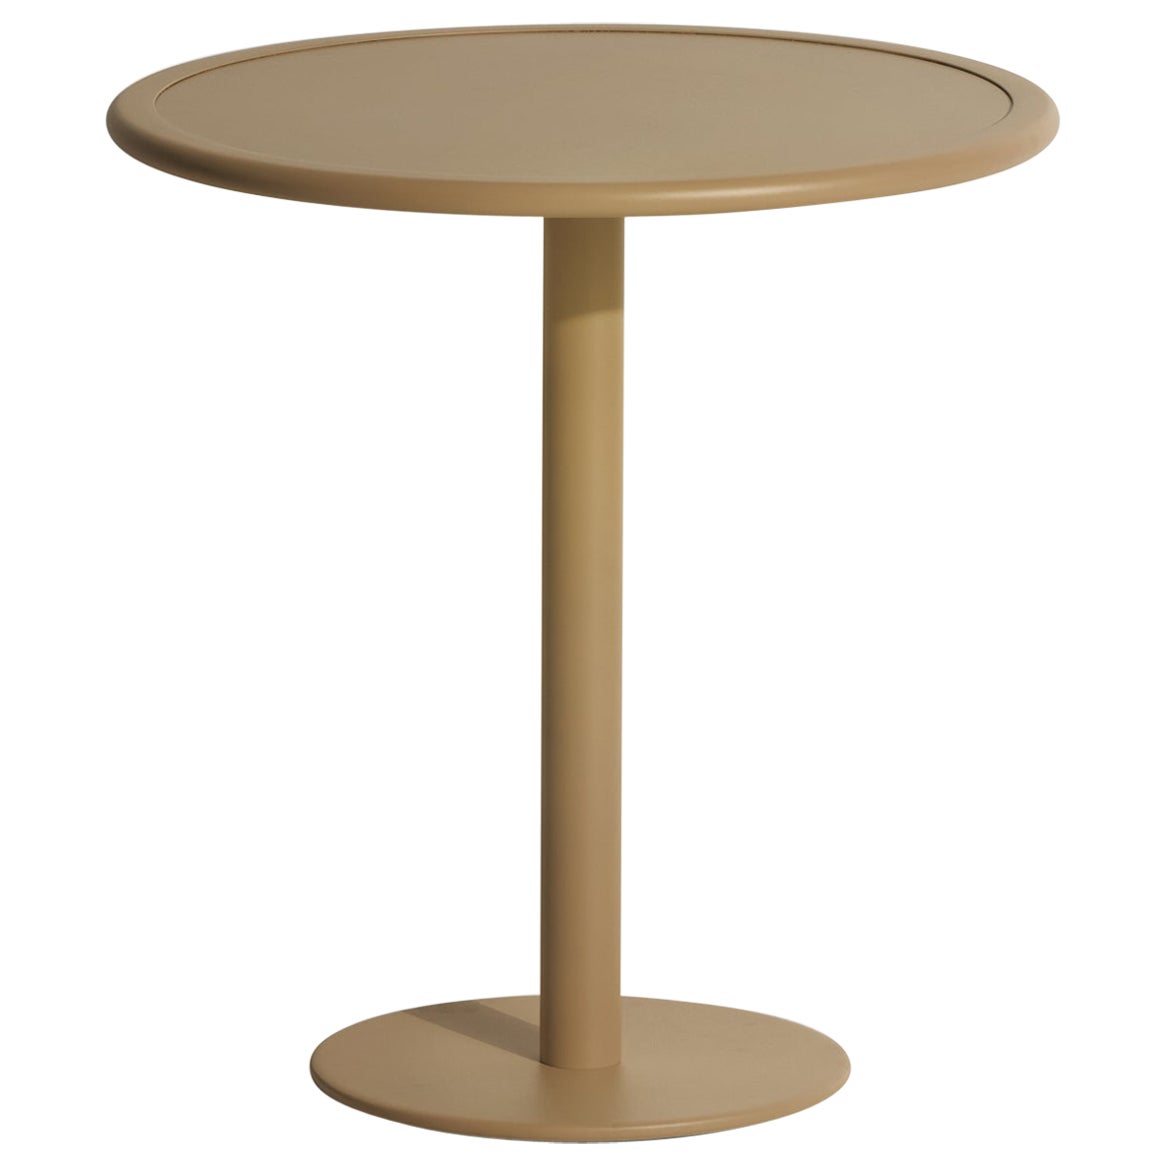 Petite Friture Week-End Bistro Round Dining Table in Gold Aluminium, 2017